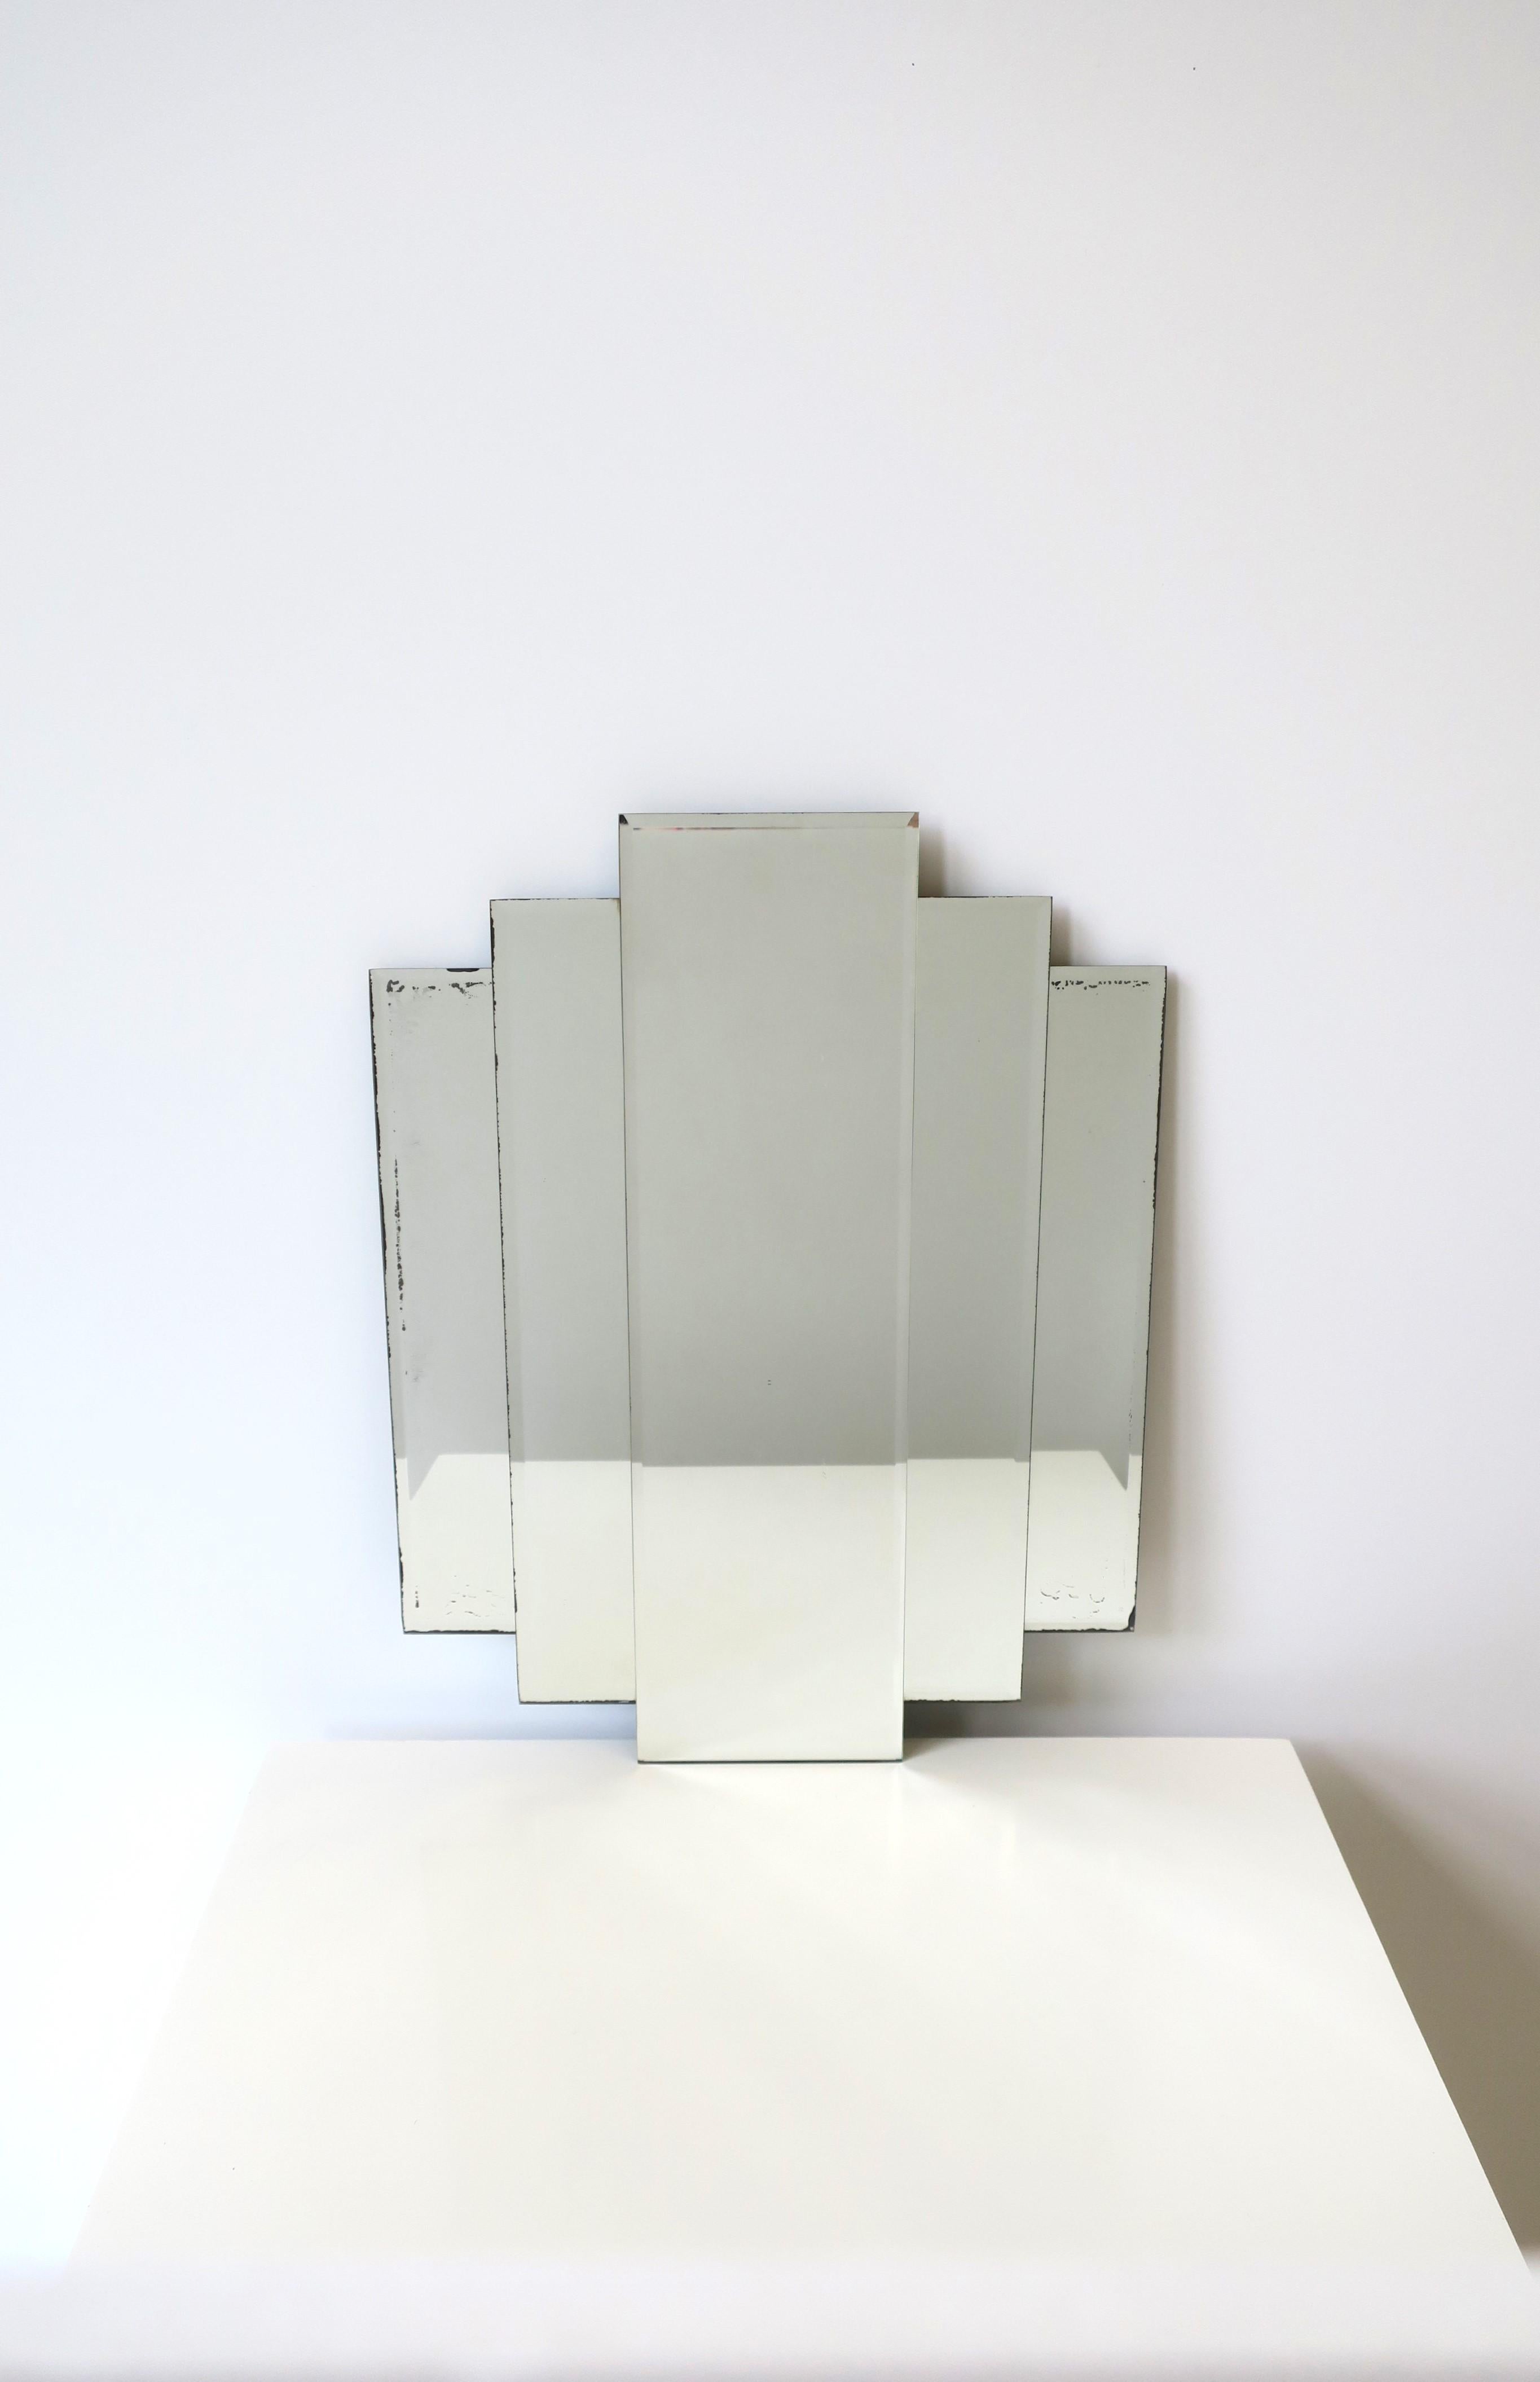 A beautiful '70 Modern Art Deco wall or vanity mirror, circa 1970s, New York. Mirror is comprised of three pieces of mirror, each with a beveled edge. A chic mirror for any wall including in a bathroom, vanity area, walk-in-closet, etc. Piece is